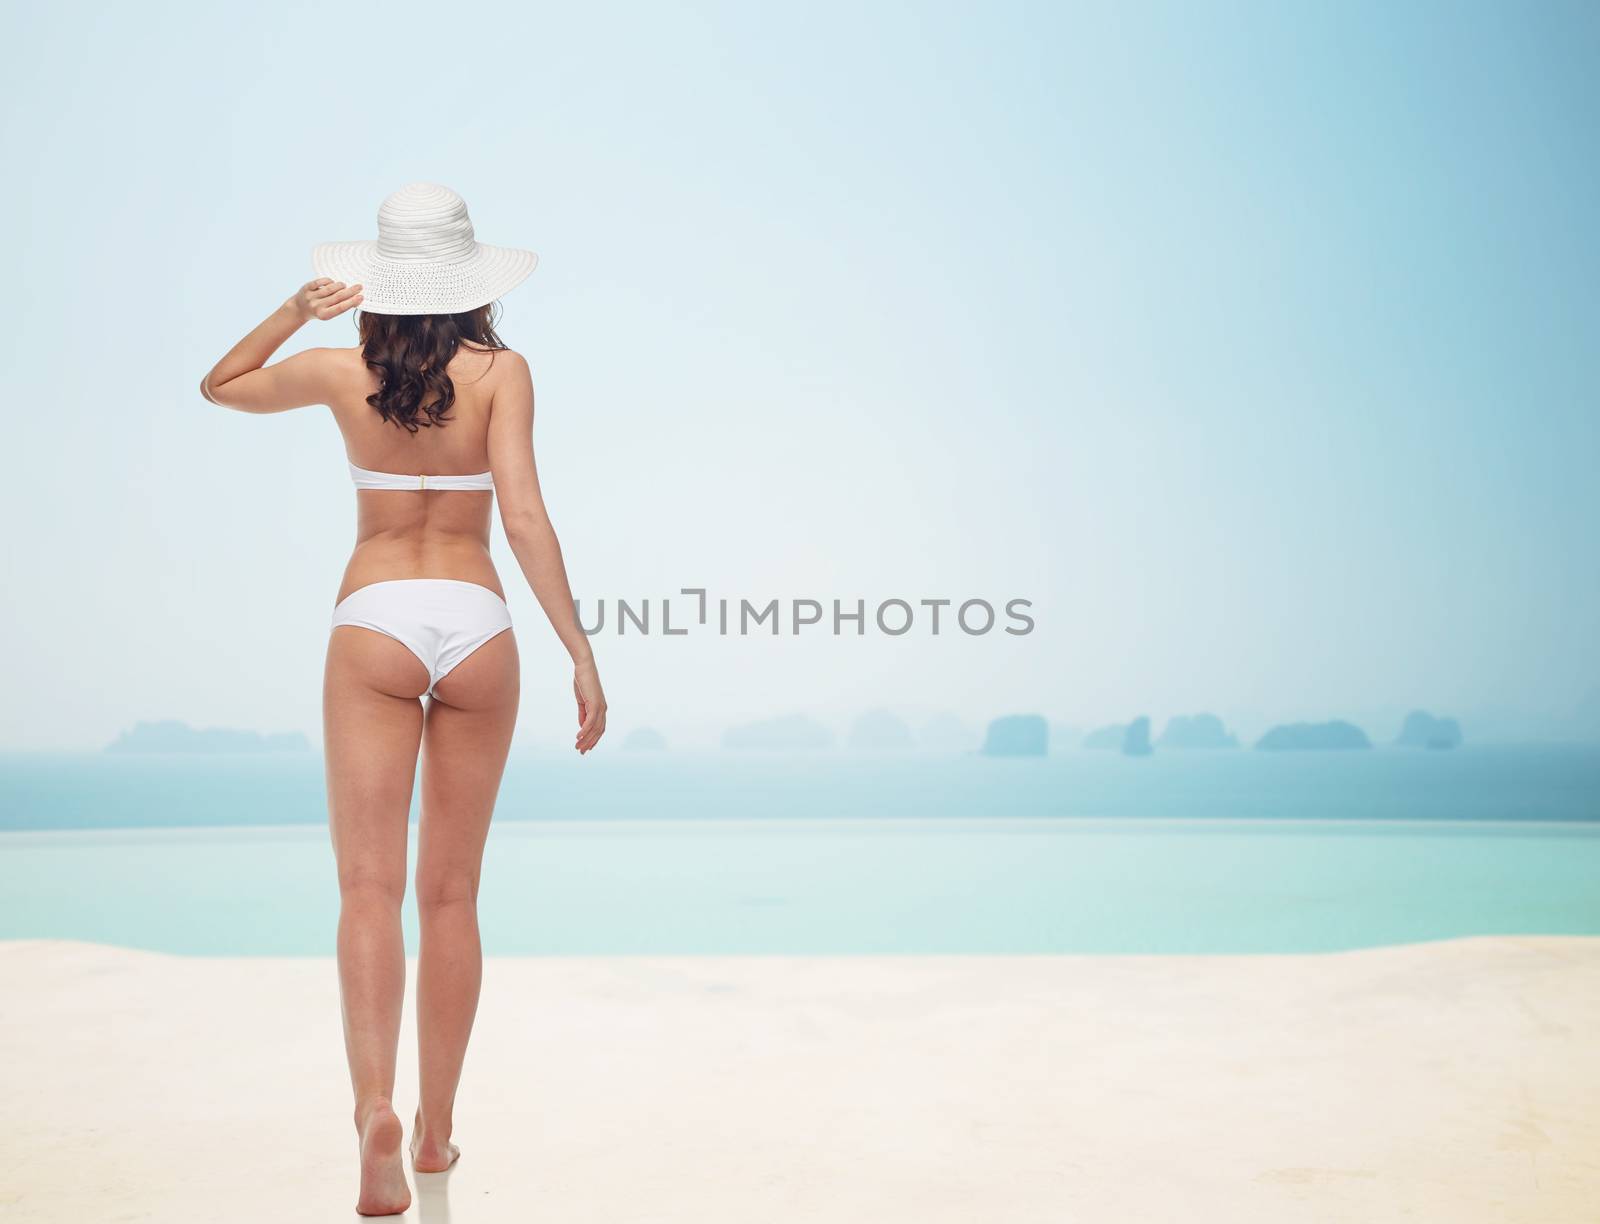 young woman in white bikini swimsuit from back by dolgachov